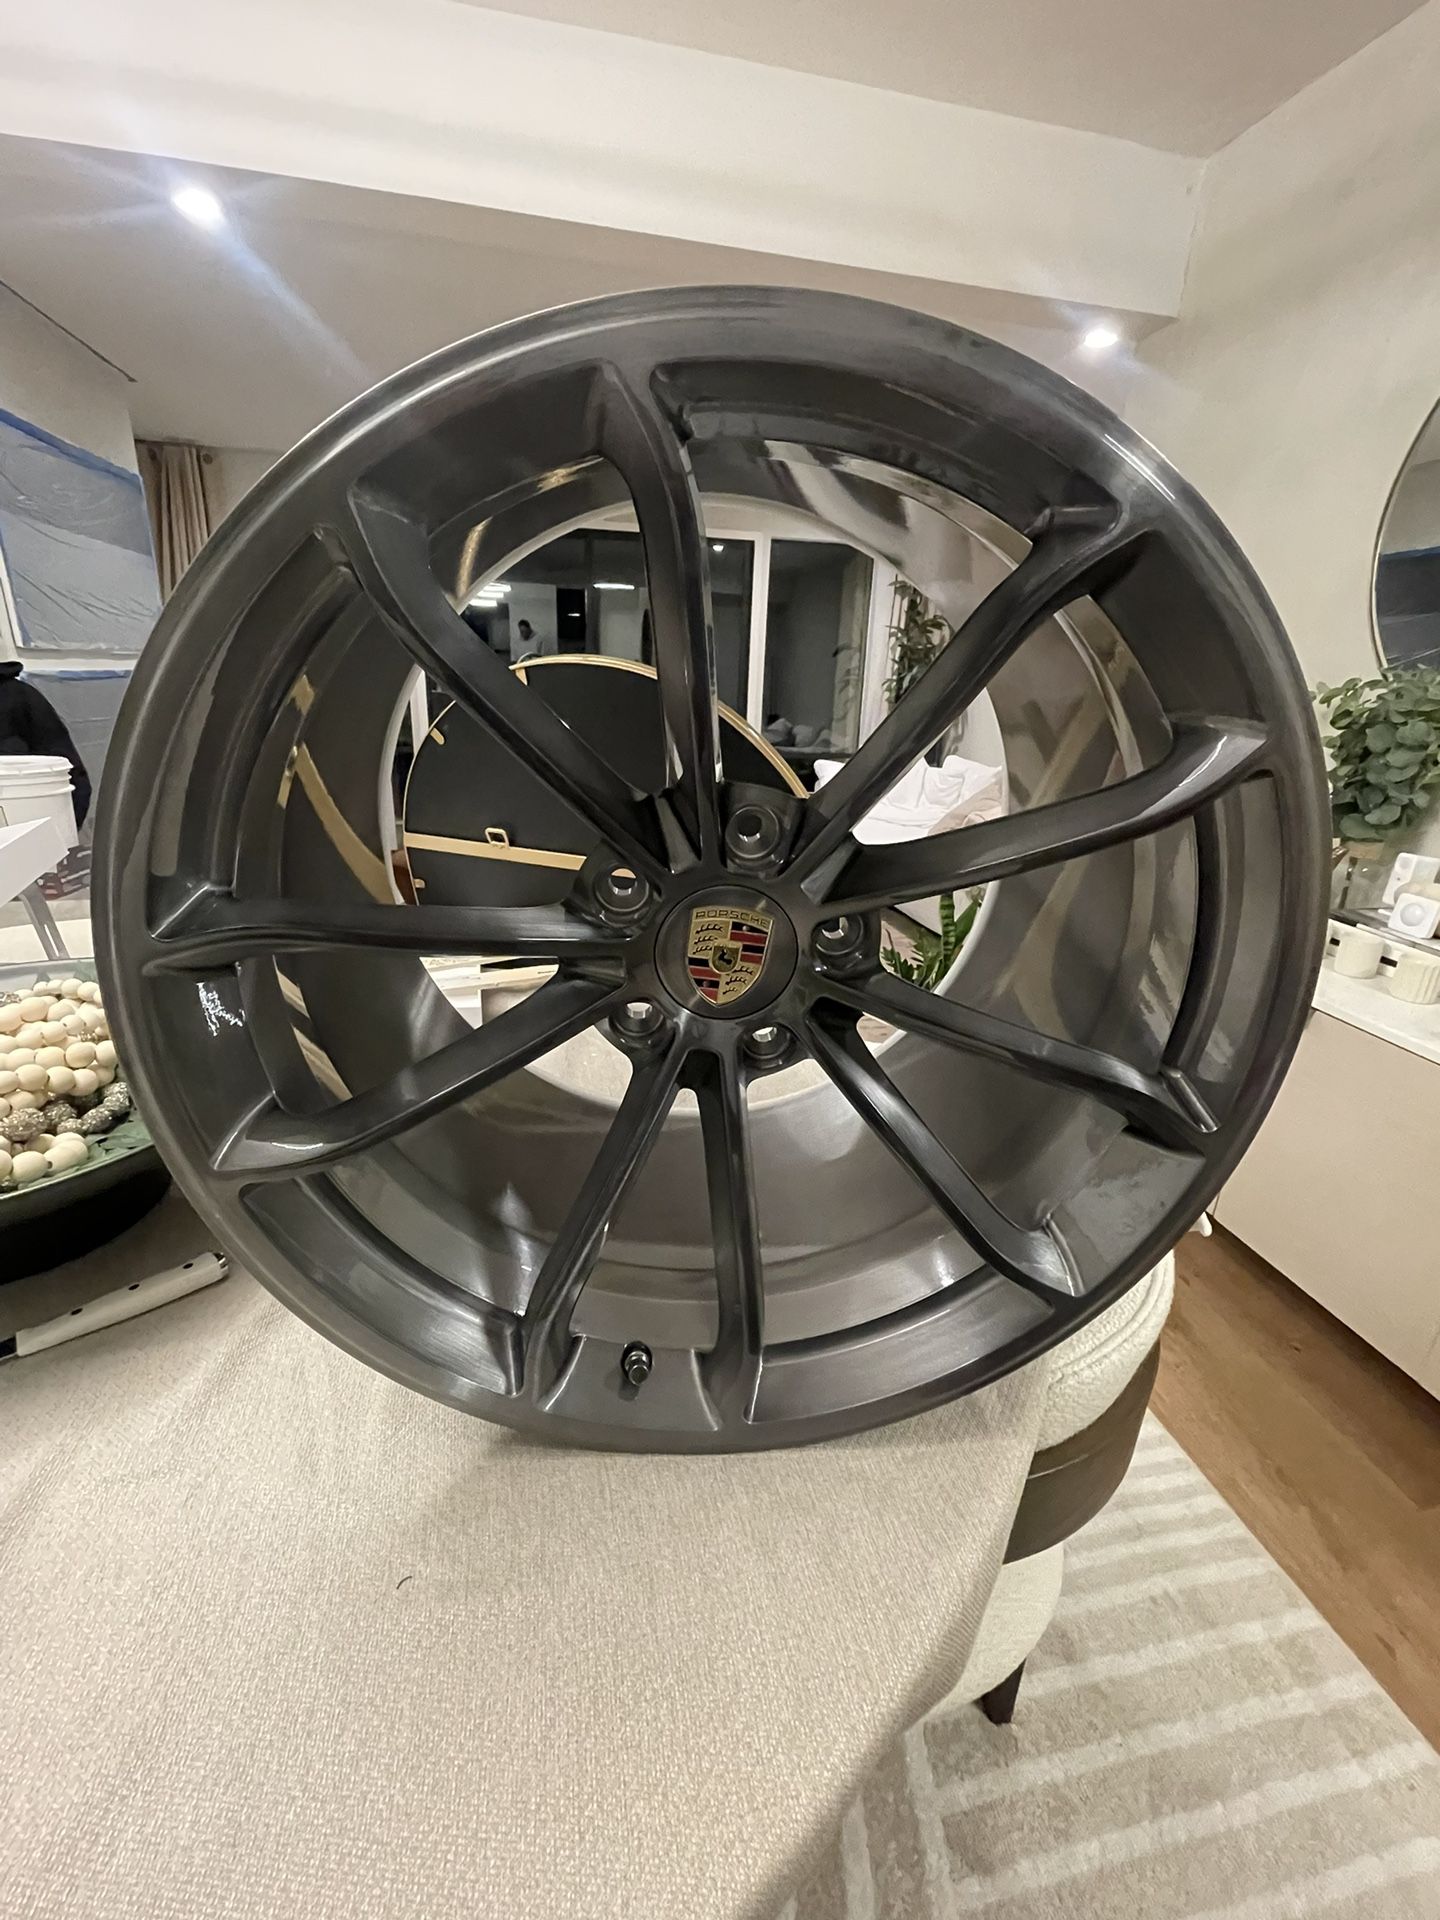 Gorgeous Forged Wheels set For 997 Wide body C4s Turbo